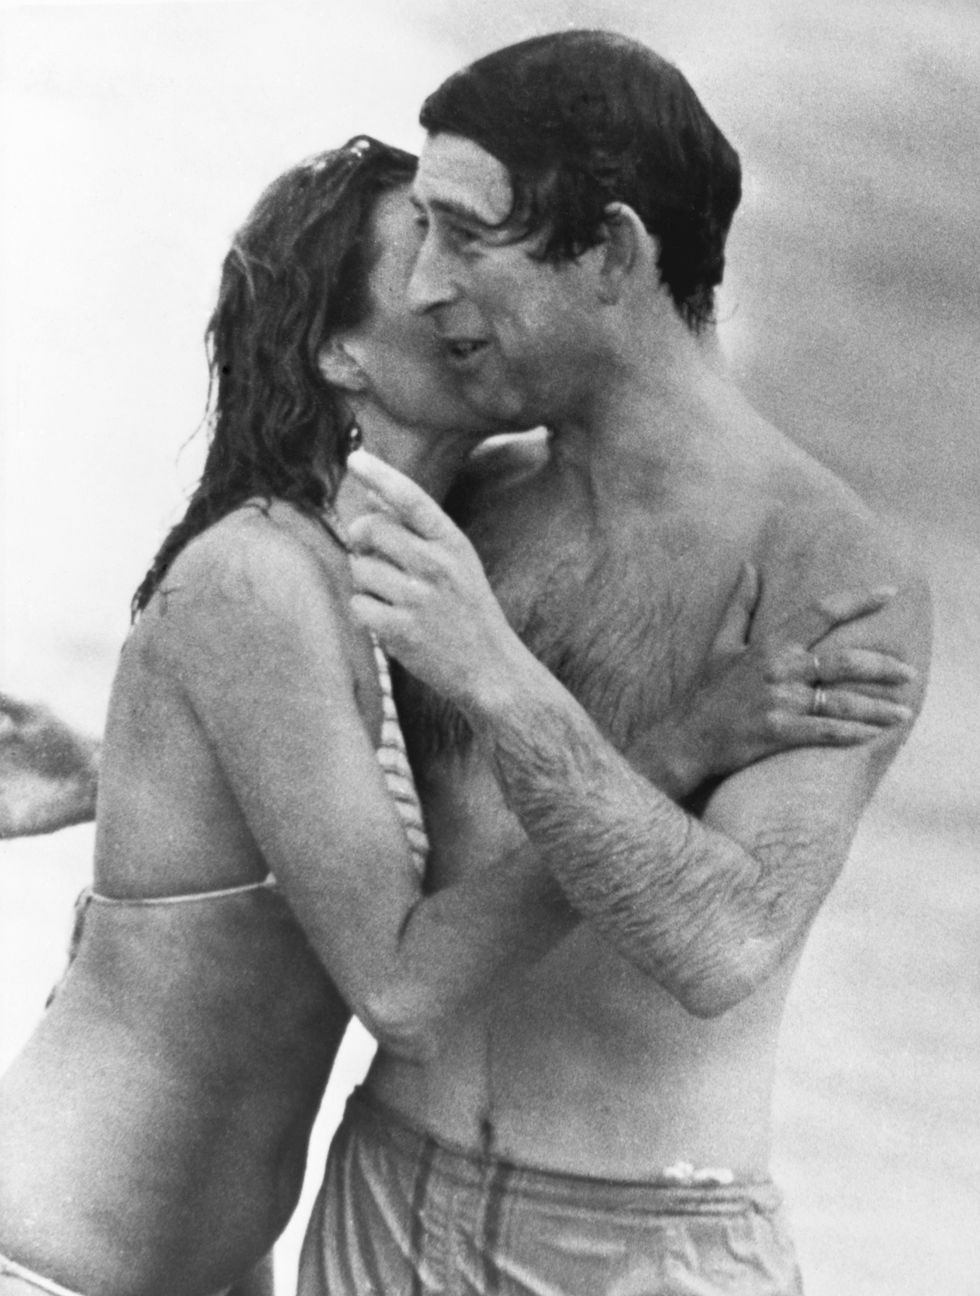 Prince Charles is kissed by Jane Priest, a model, as he emerges from the water at Cottesloe beach in Perth, during his 1979 tour of Australia.